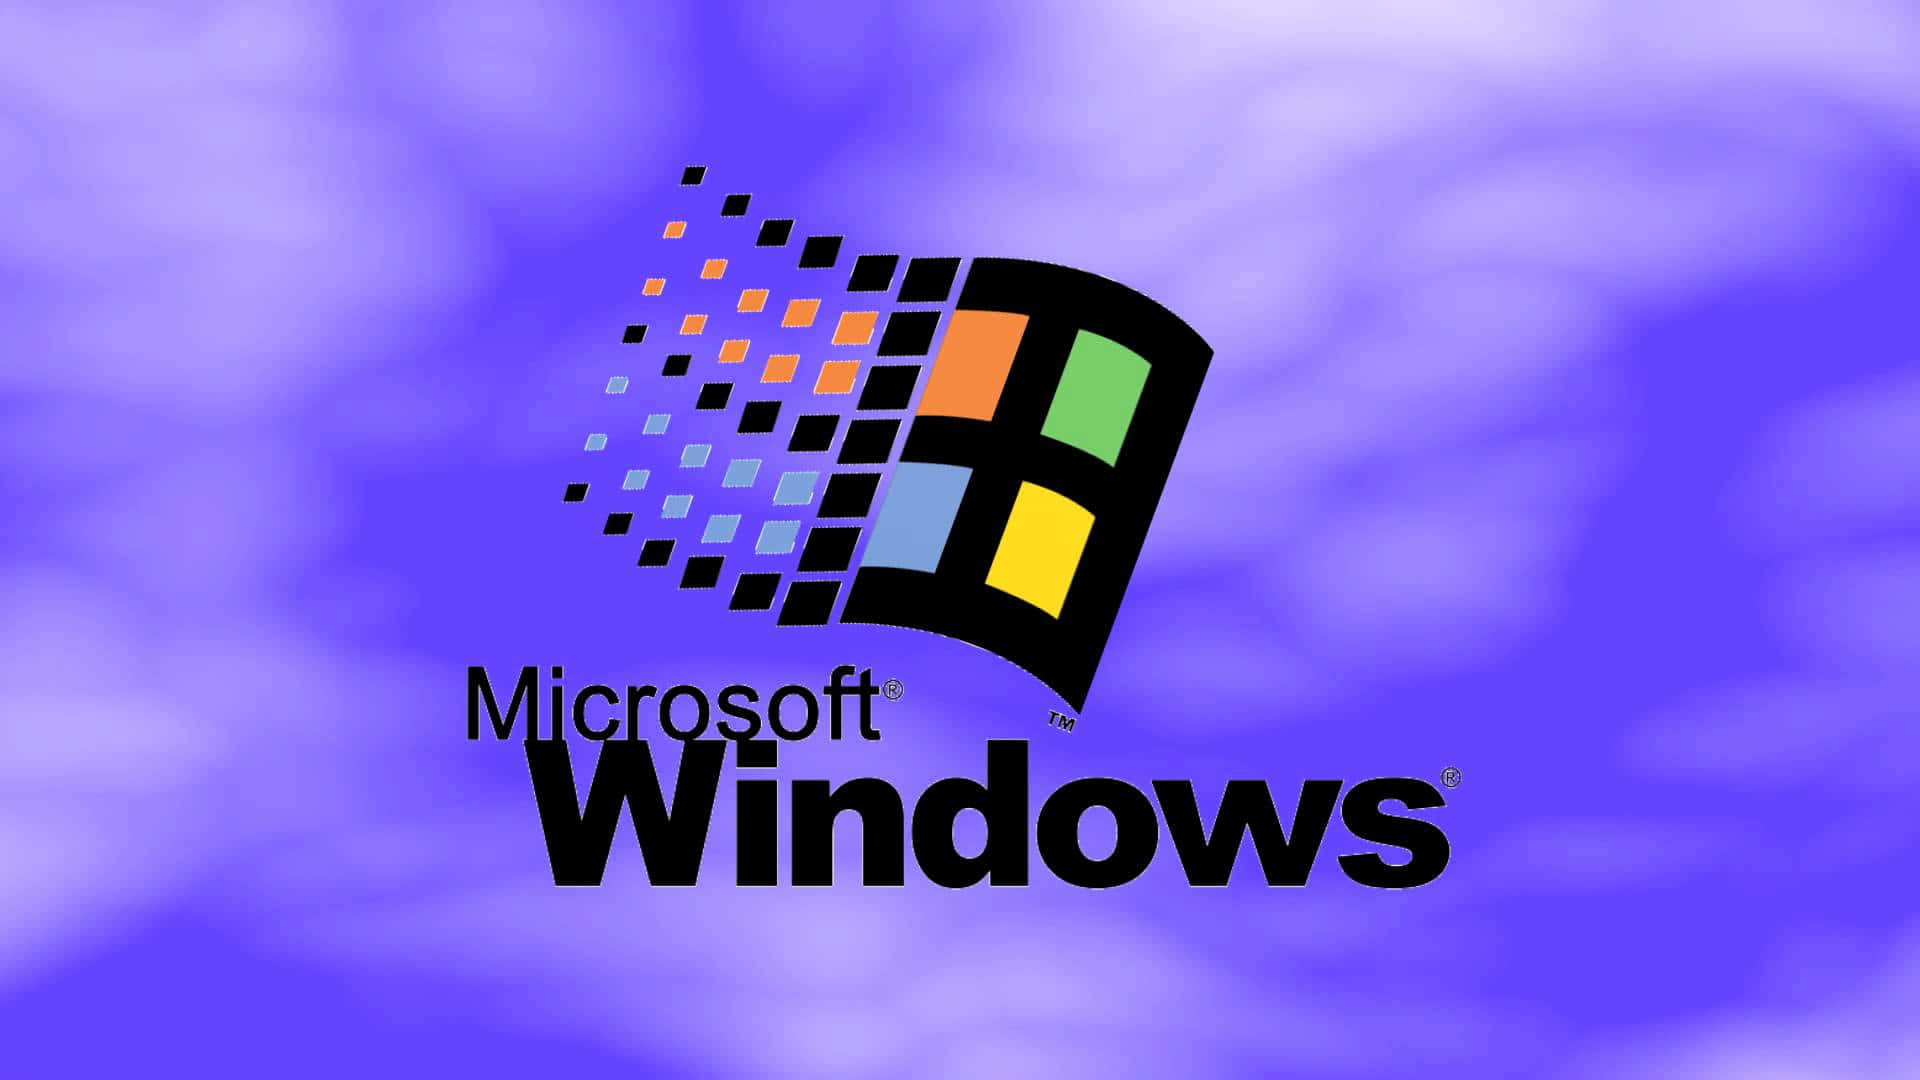 Experience Power, Efficiency and Fun with Windows 95!